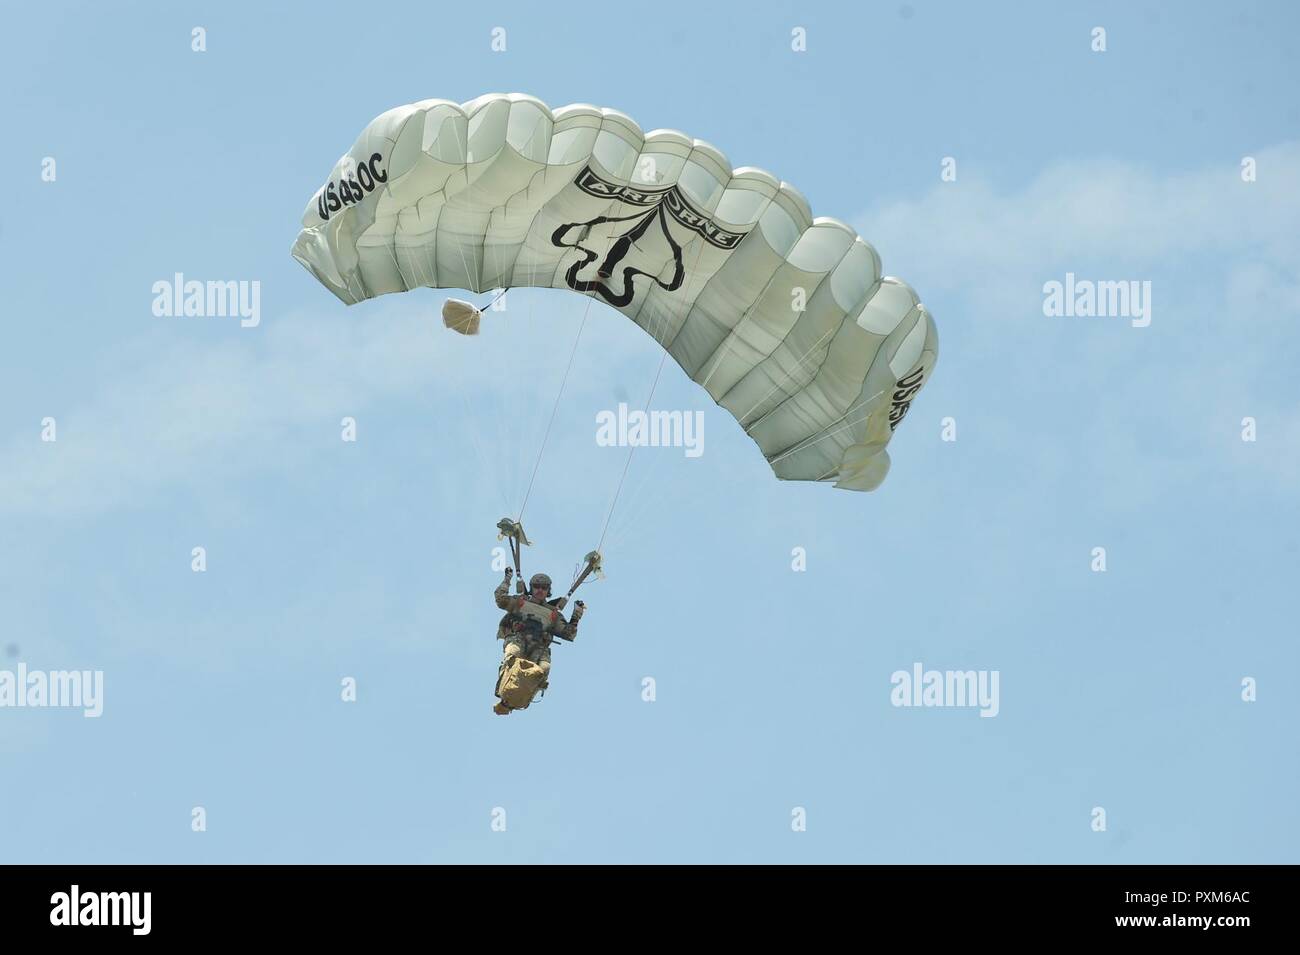 A member of the Black Daggers, the official U.S. Army Special Operations Command Parachute Demonstration Team, performs aerial stunts during Scott Air Force Base 2017 Air Show and Open House June 10, which celebrates the base’s 100th anniversary.  The black daggers use the military variant of the ram-air parachute, which is a flexible-wing glider.  This allows a free-fall parachutist the ability to jump with more than 100 pounds of additional equipment. Stock Photo